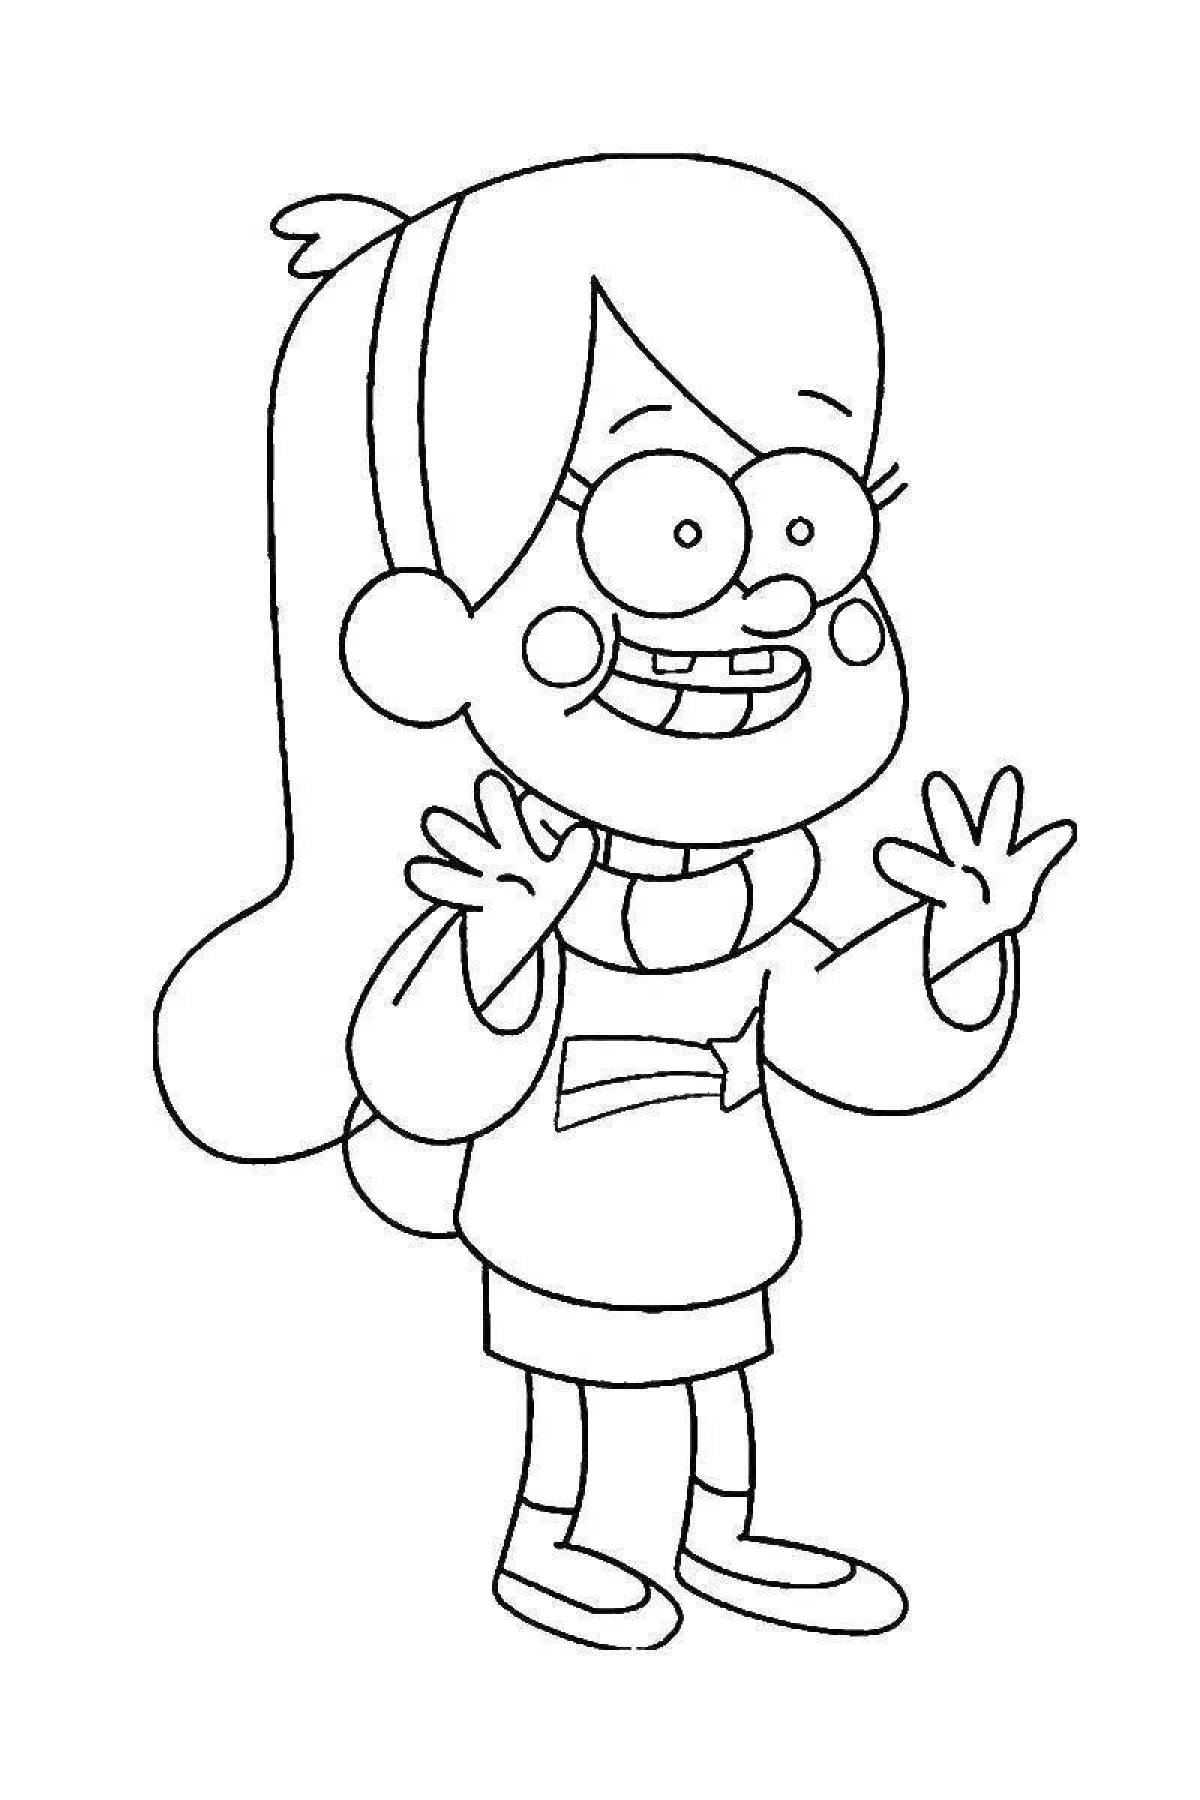 Gravity falls art coloring pages